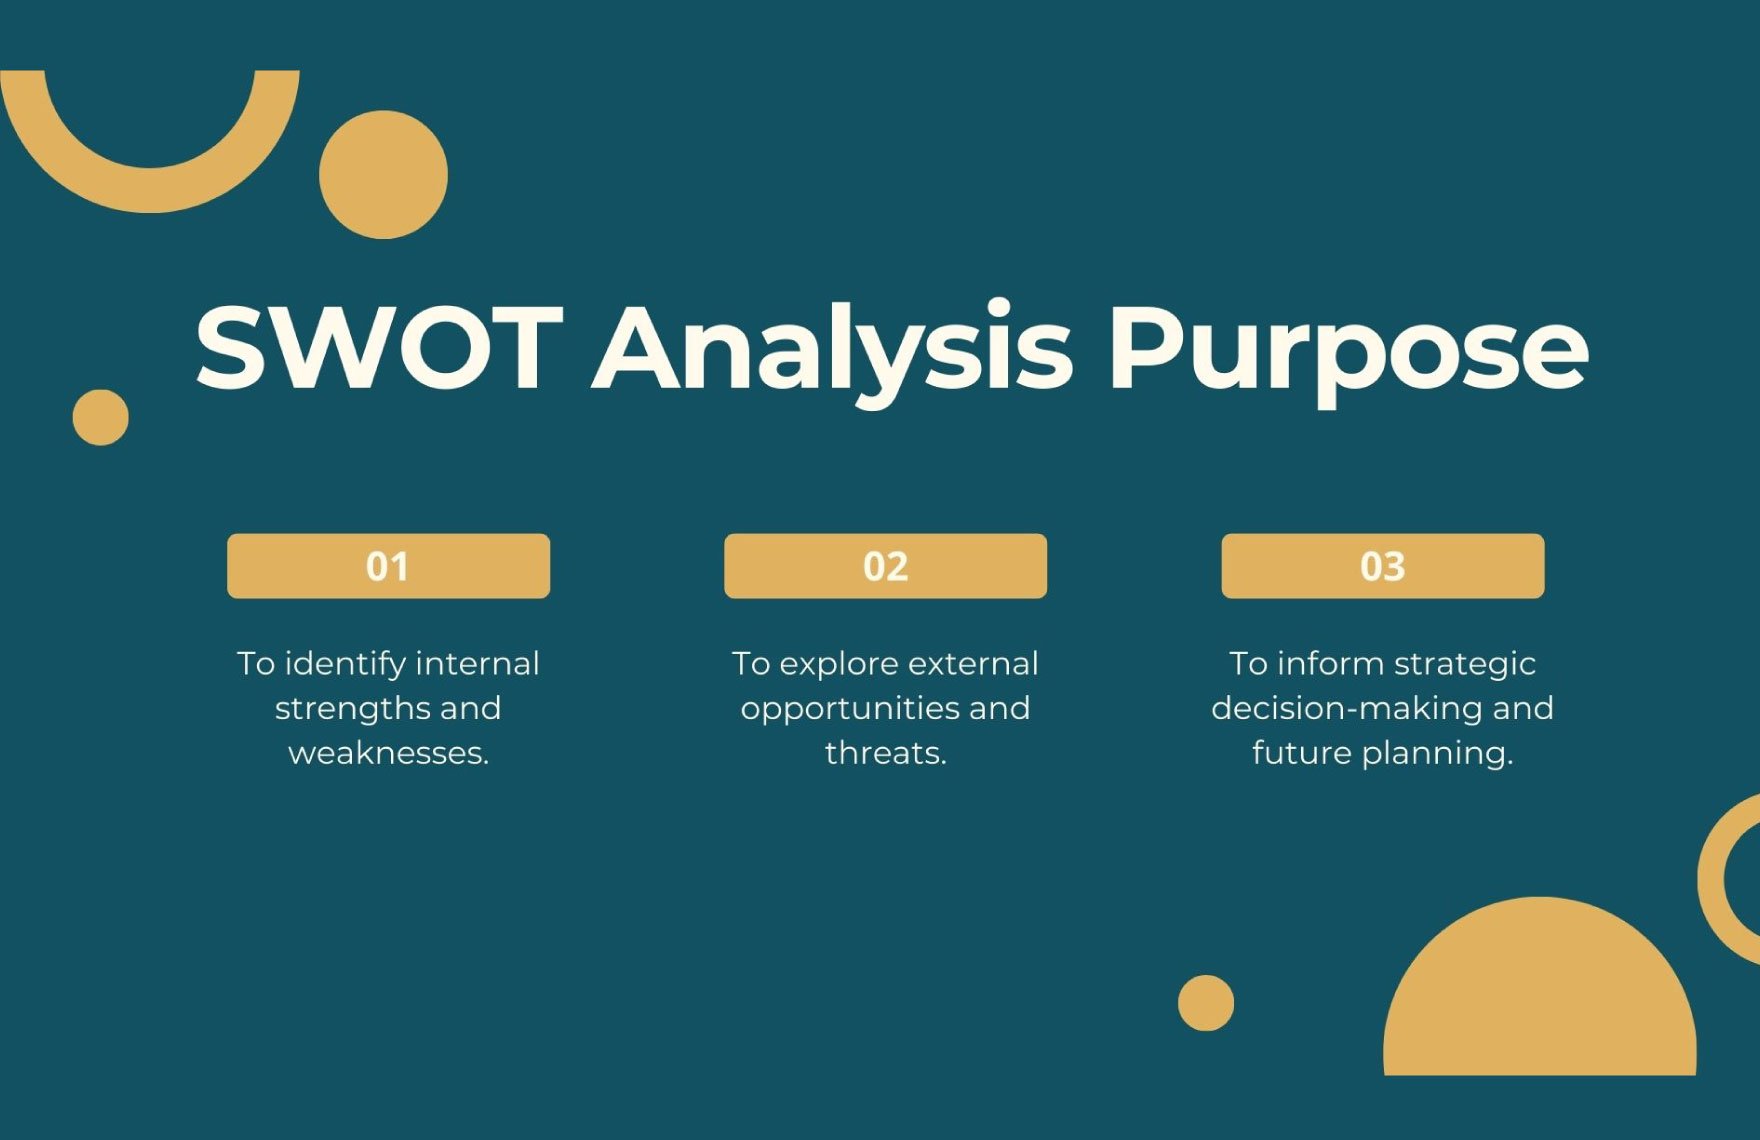 SWOT Analysis in Business Environment Template